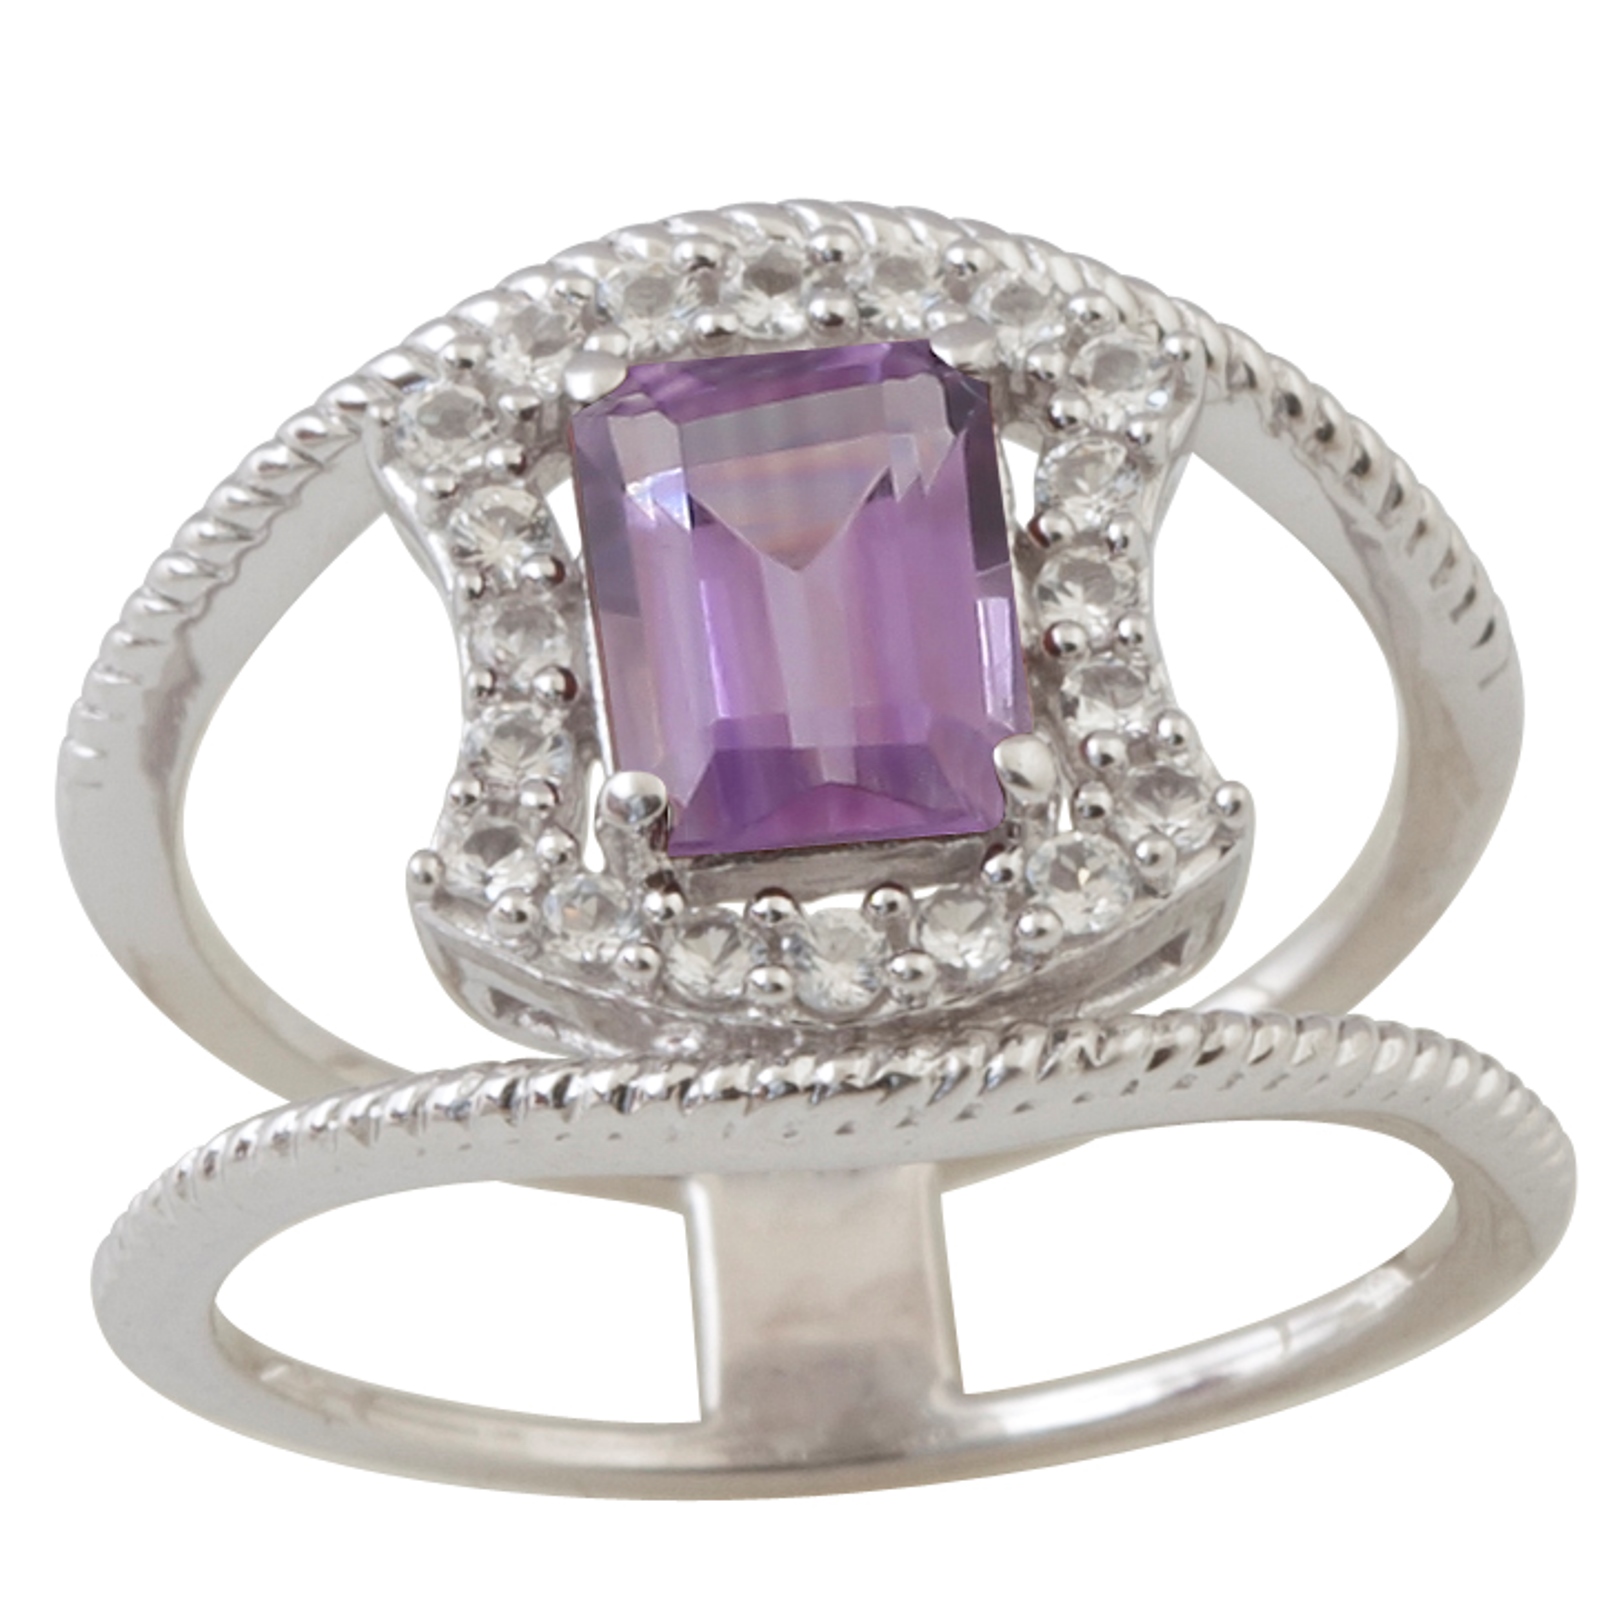 Sterling Silver Ring with Amethyst 8x6 Octagon Shape Stone